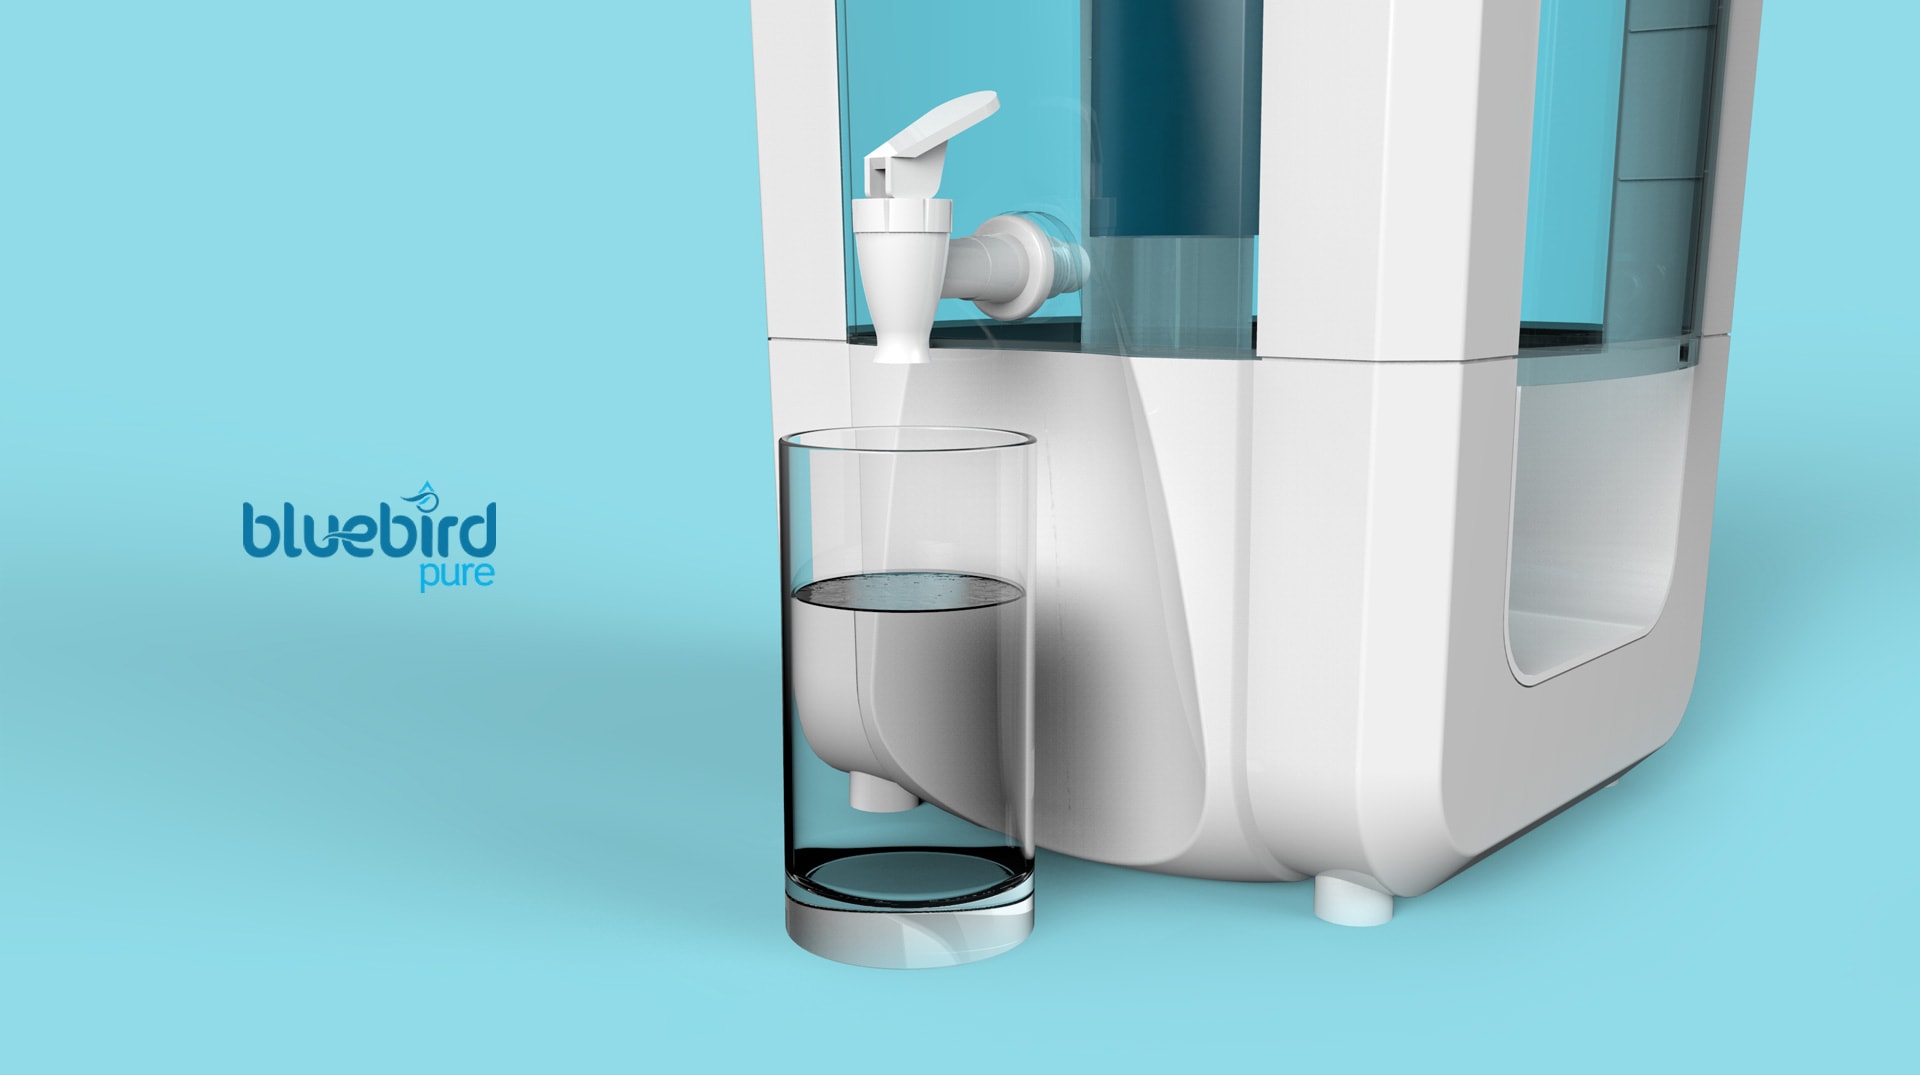 Bluebird RO Water Purifier Design by Story Design to purify water and give clean water